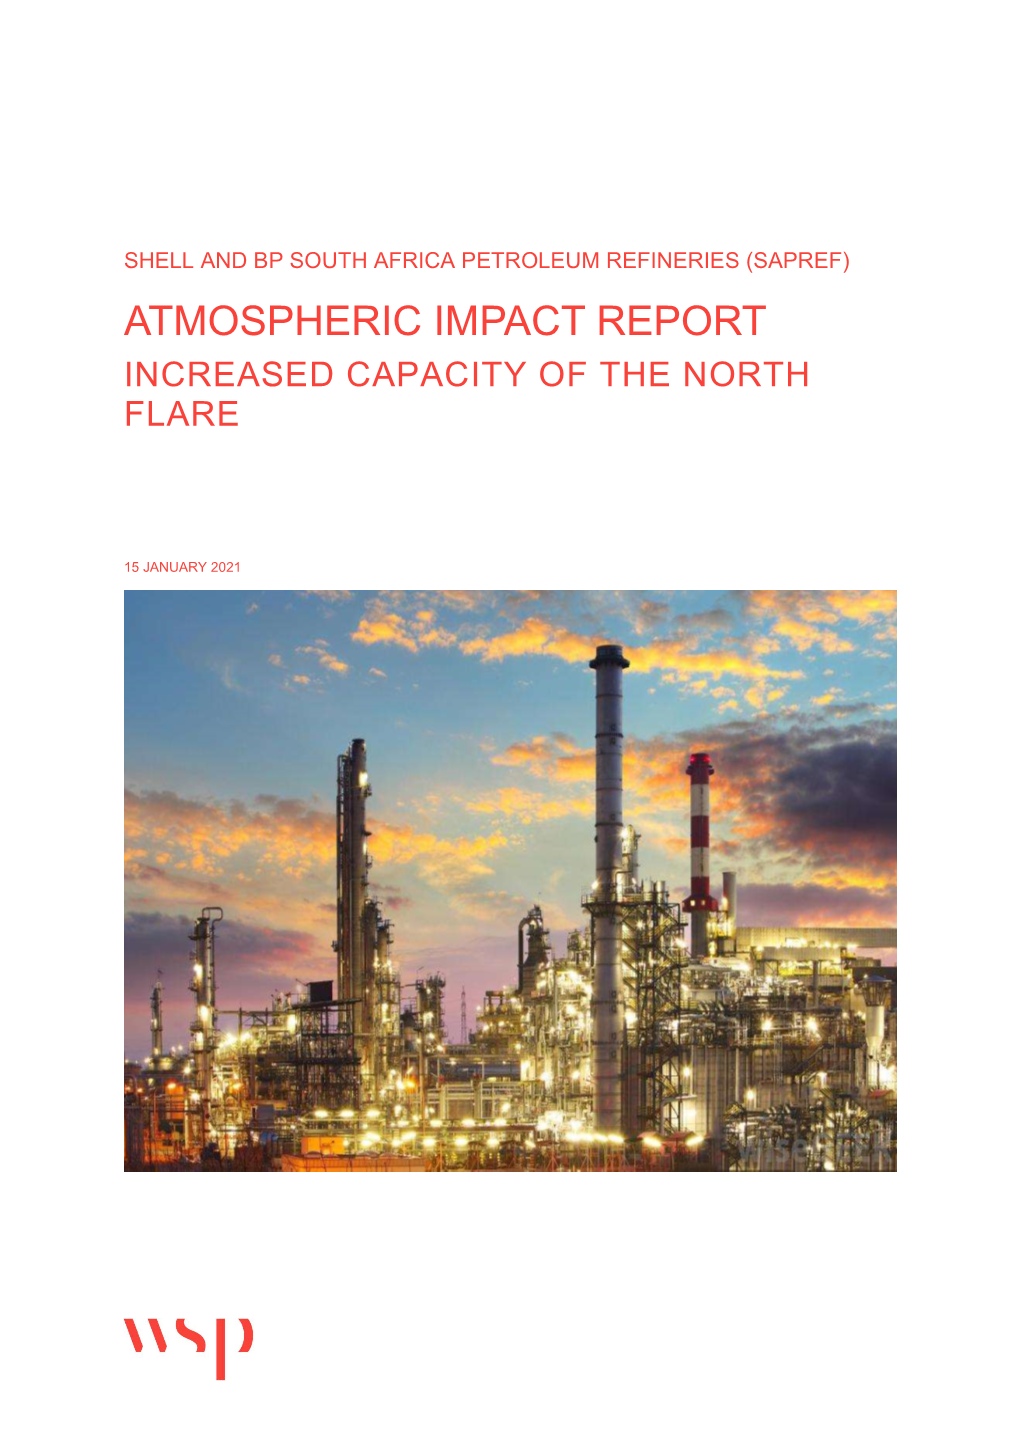 Atmospheric Impact Report Increased Capacity of the North Flare